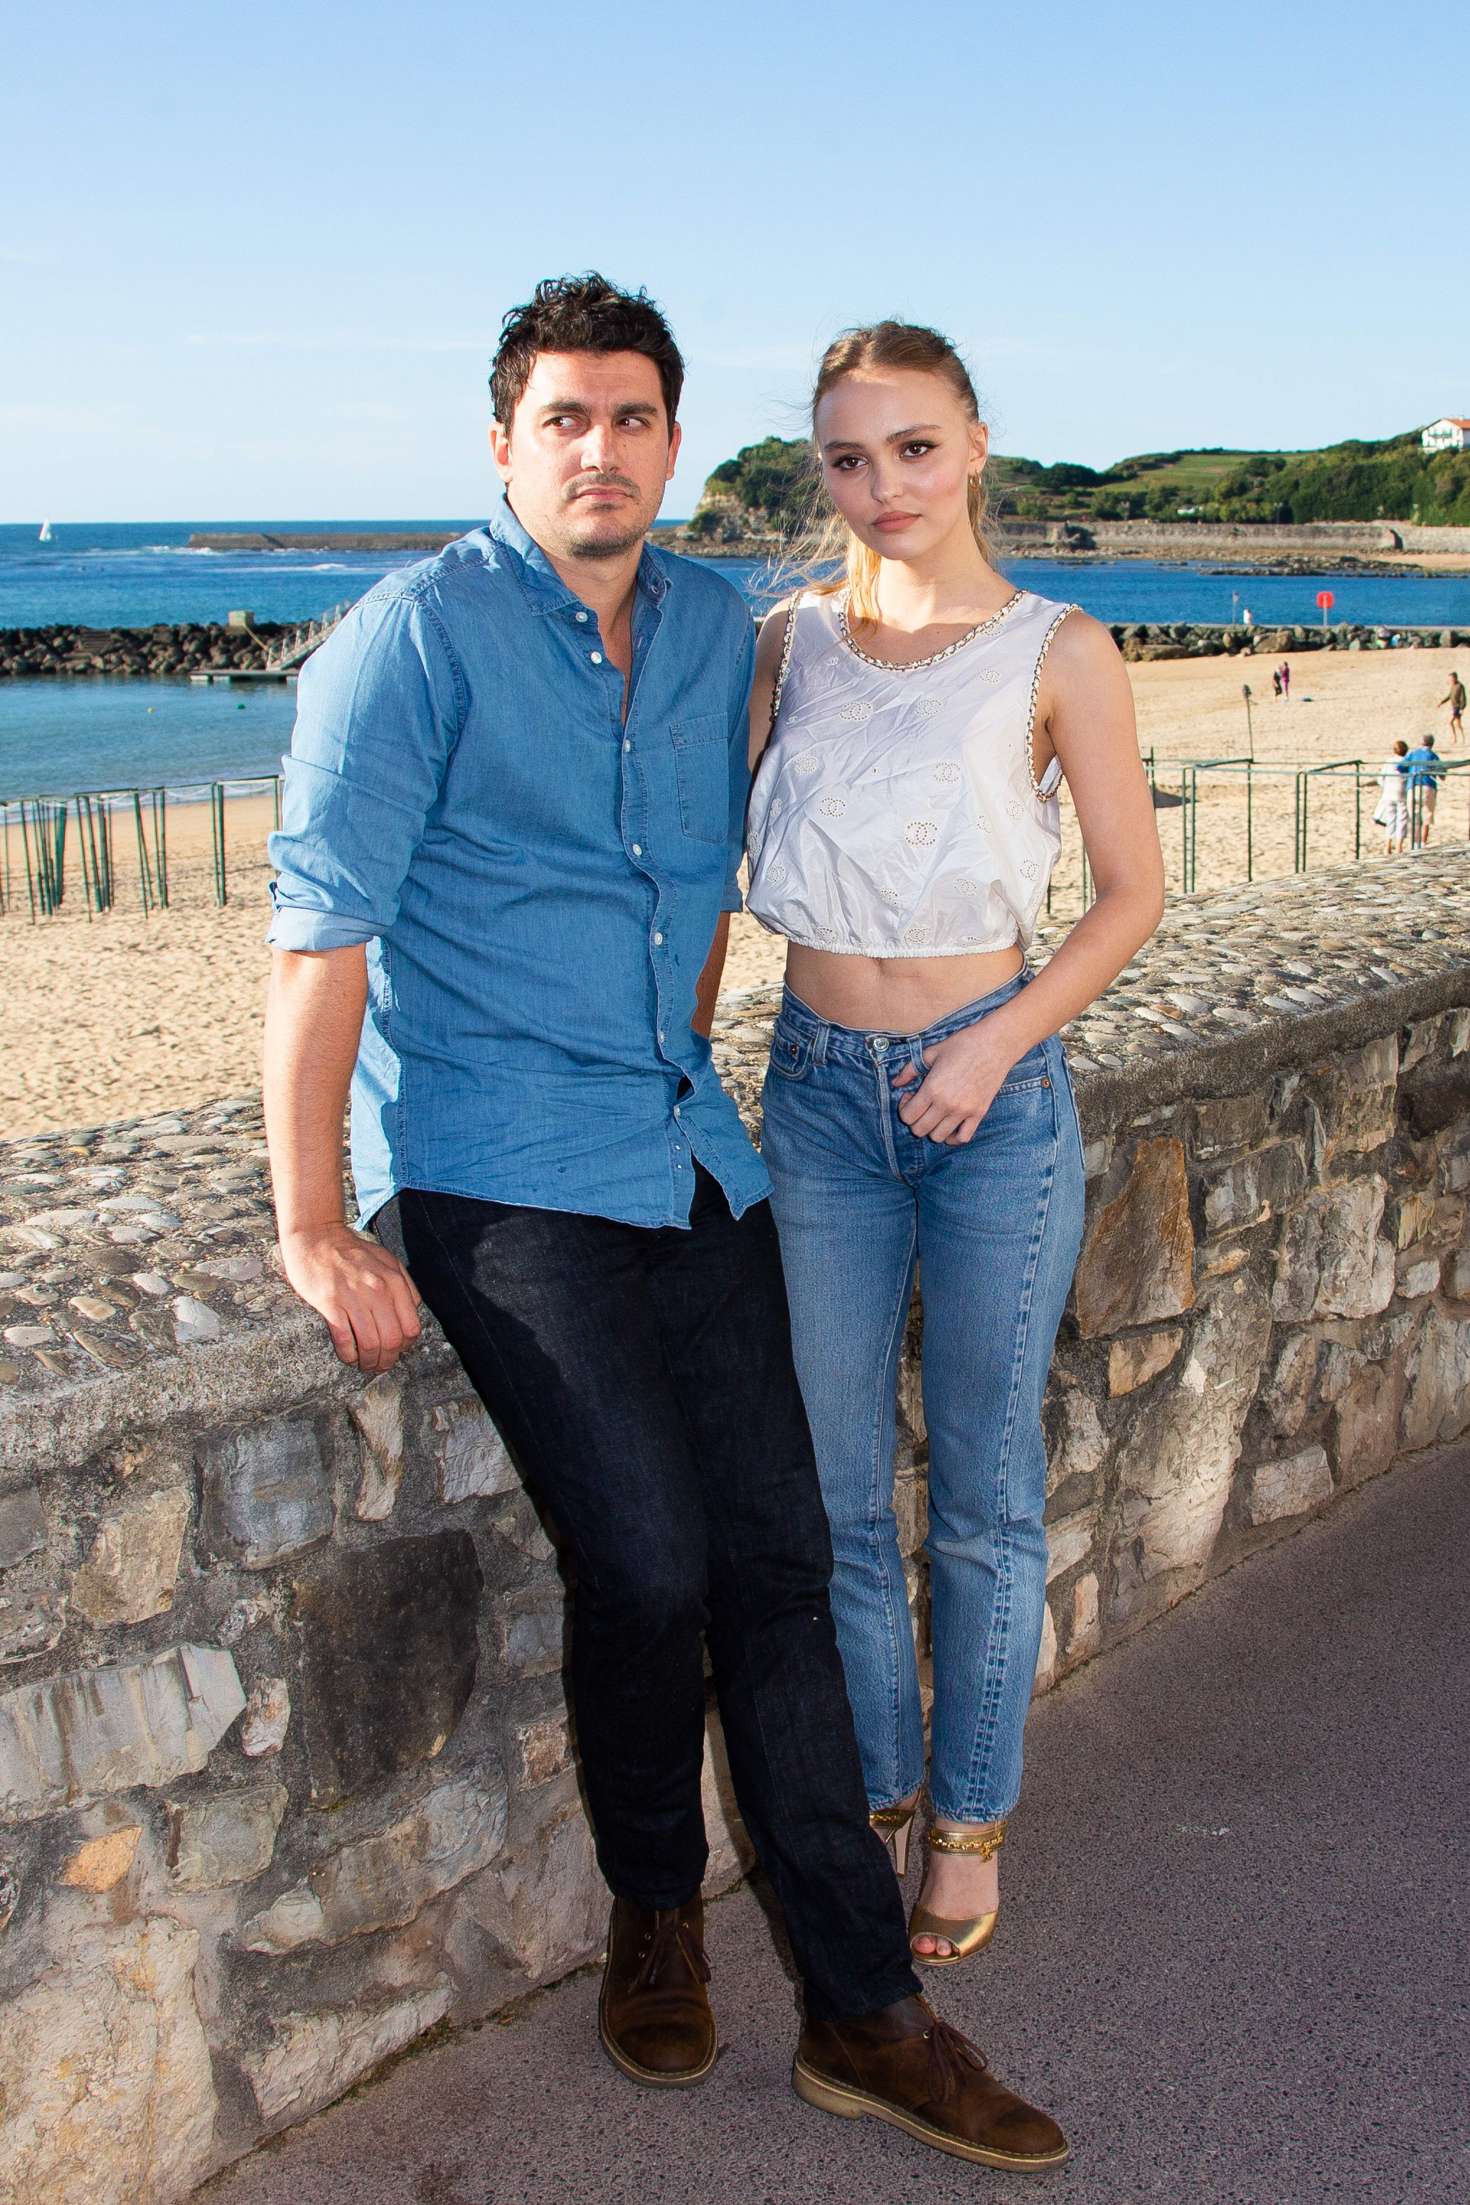 Lily Rose Depp in White Top and Jeans at 5th International Film Festival of St Jean de Luz